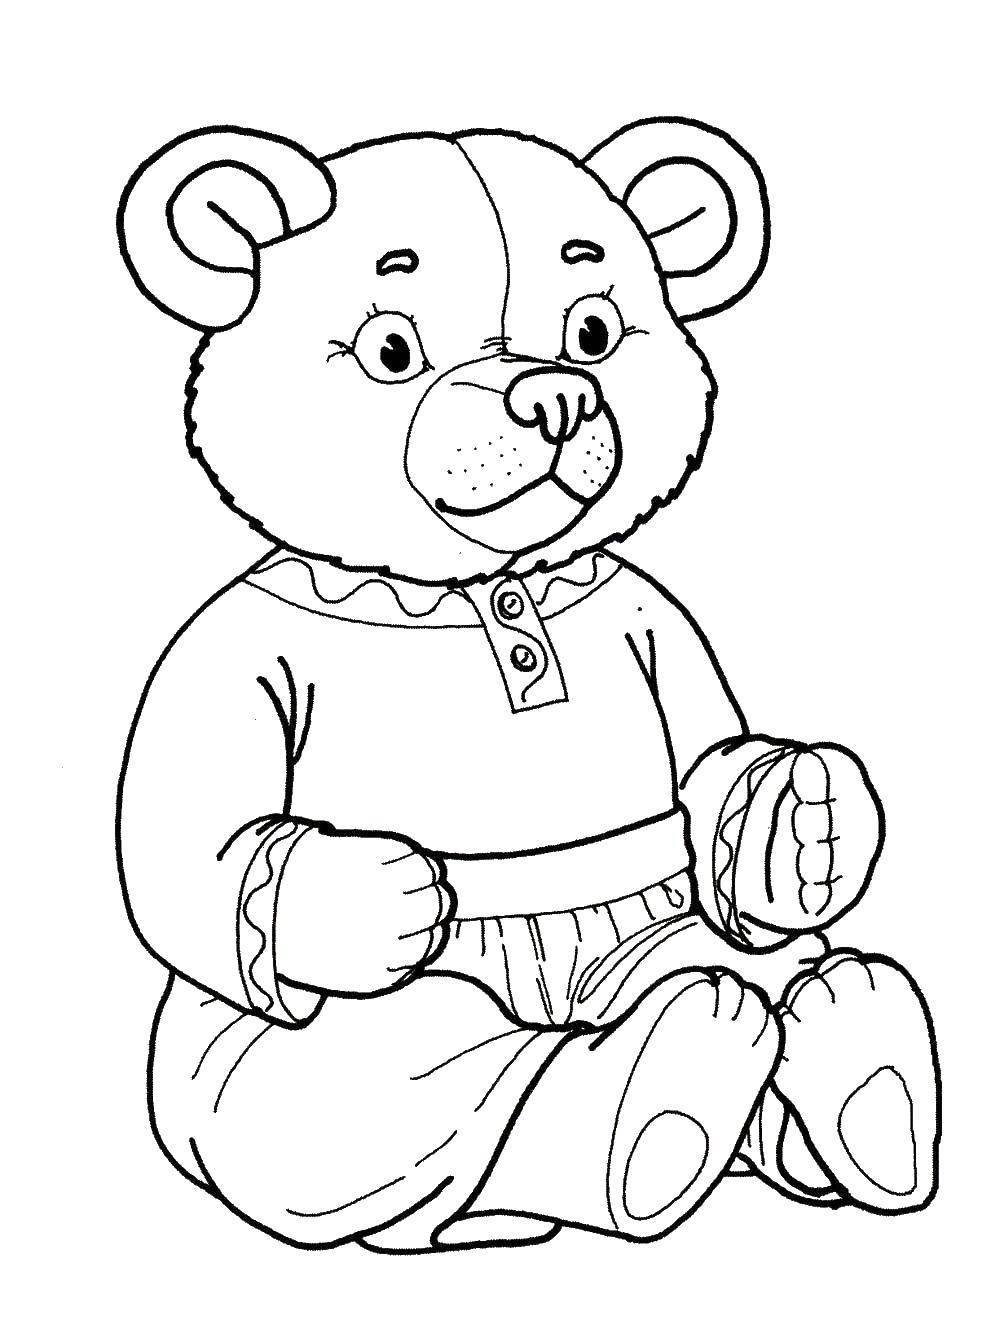 Coloring Bear. Category toy. Tags:  bear, toy.